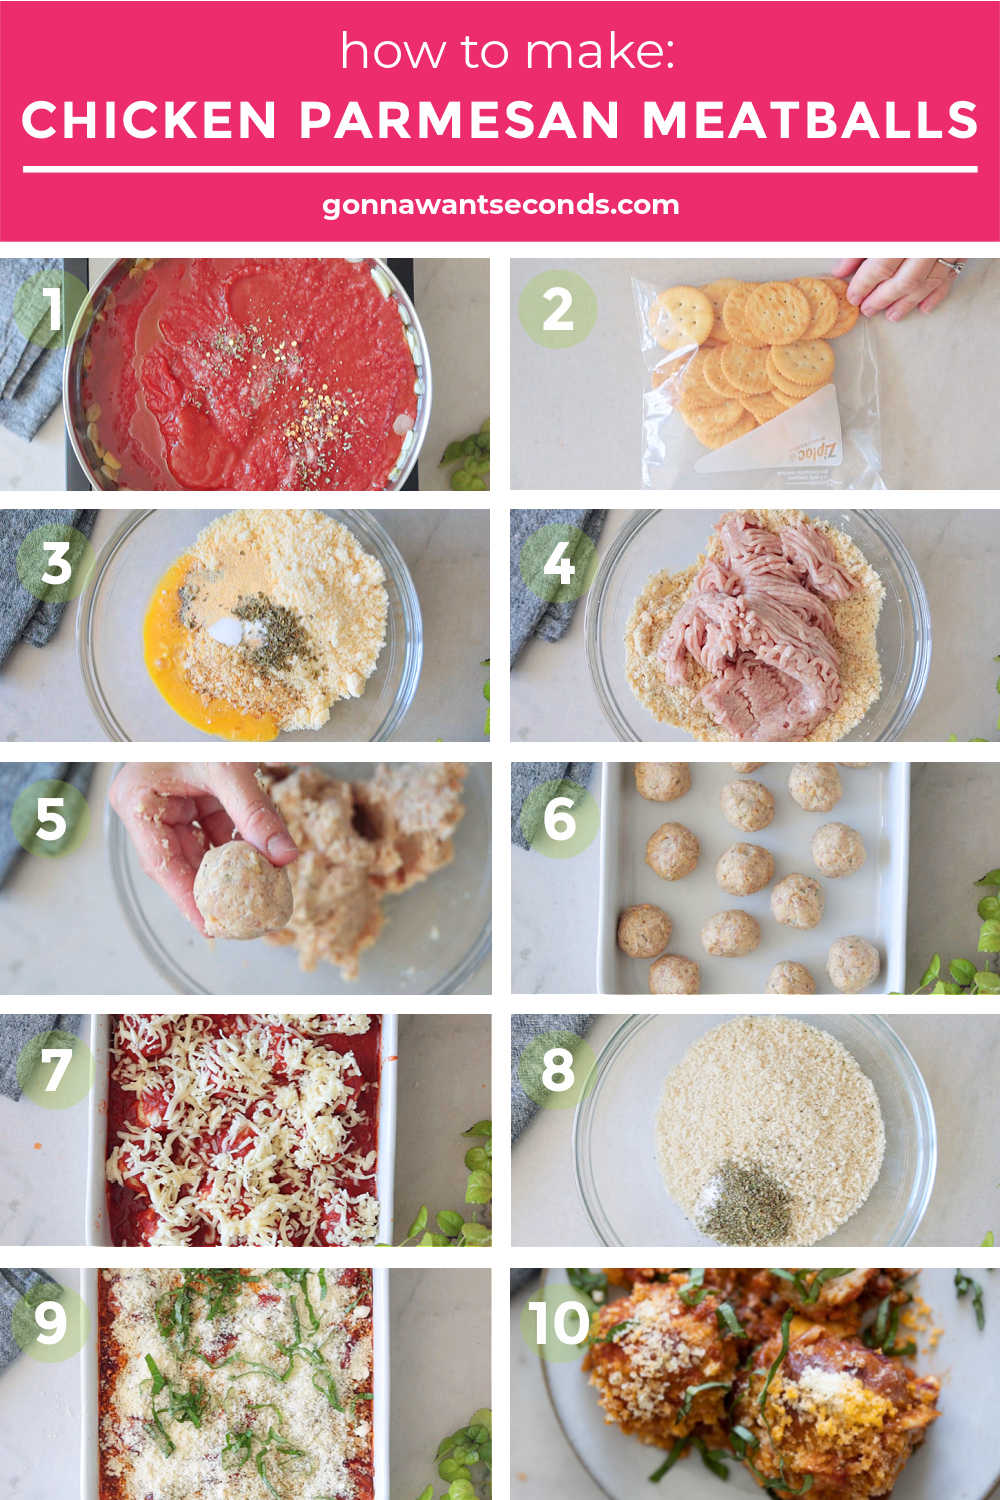 Step by step how to make chicken parmesan meatballs